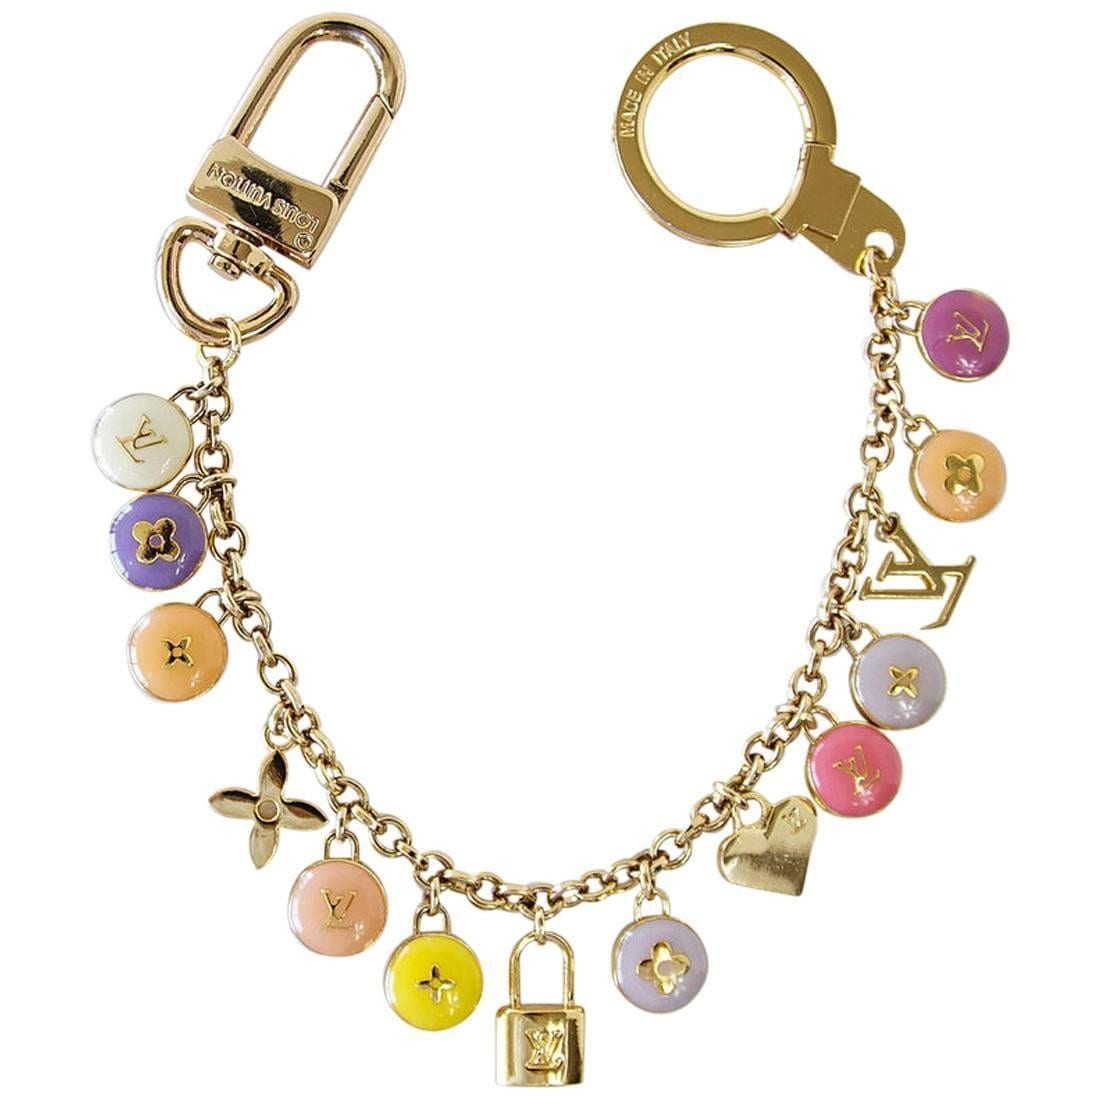 Louis Vuitton Logo Bag Charm Pastilles Gold and Pastels - mightychic